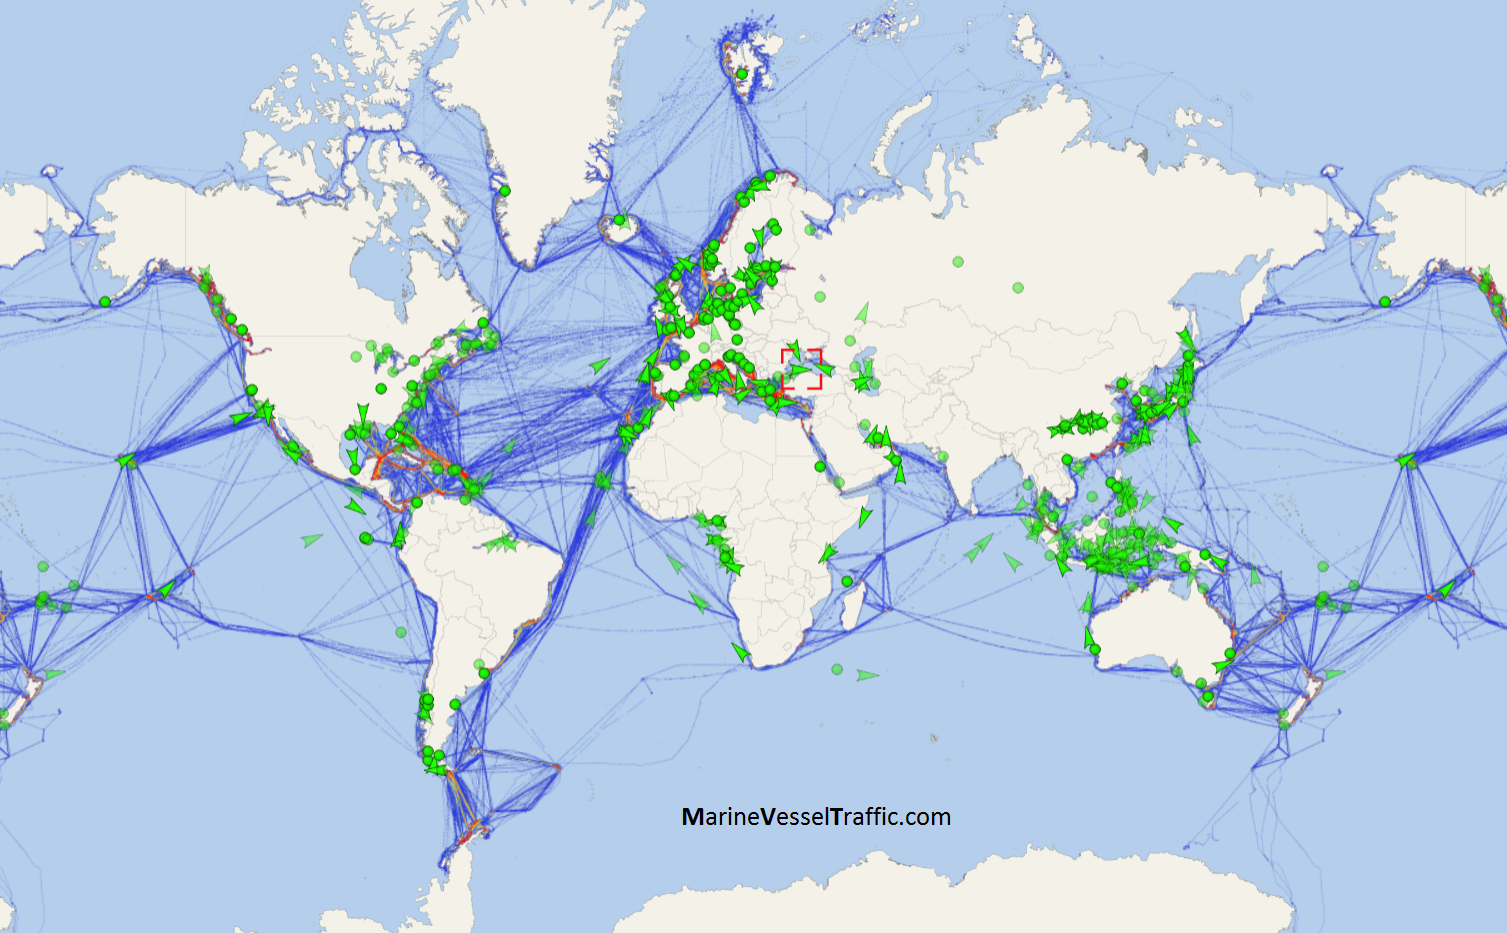 the world cruise ship route